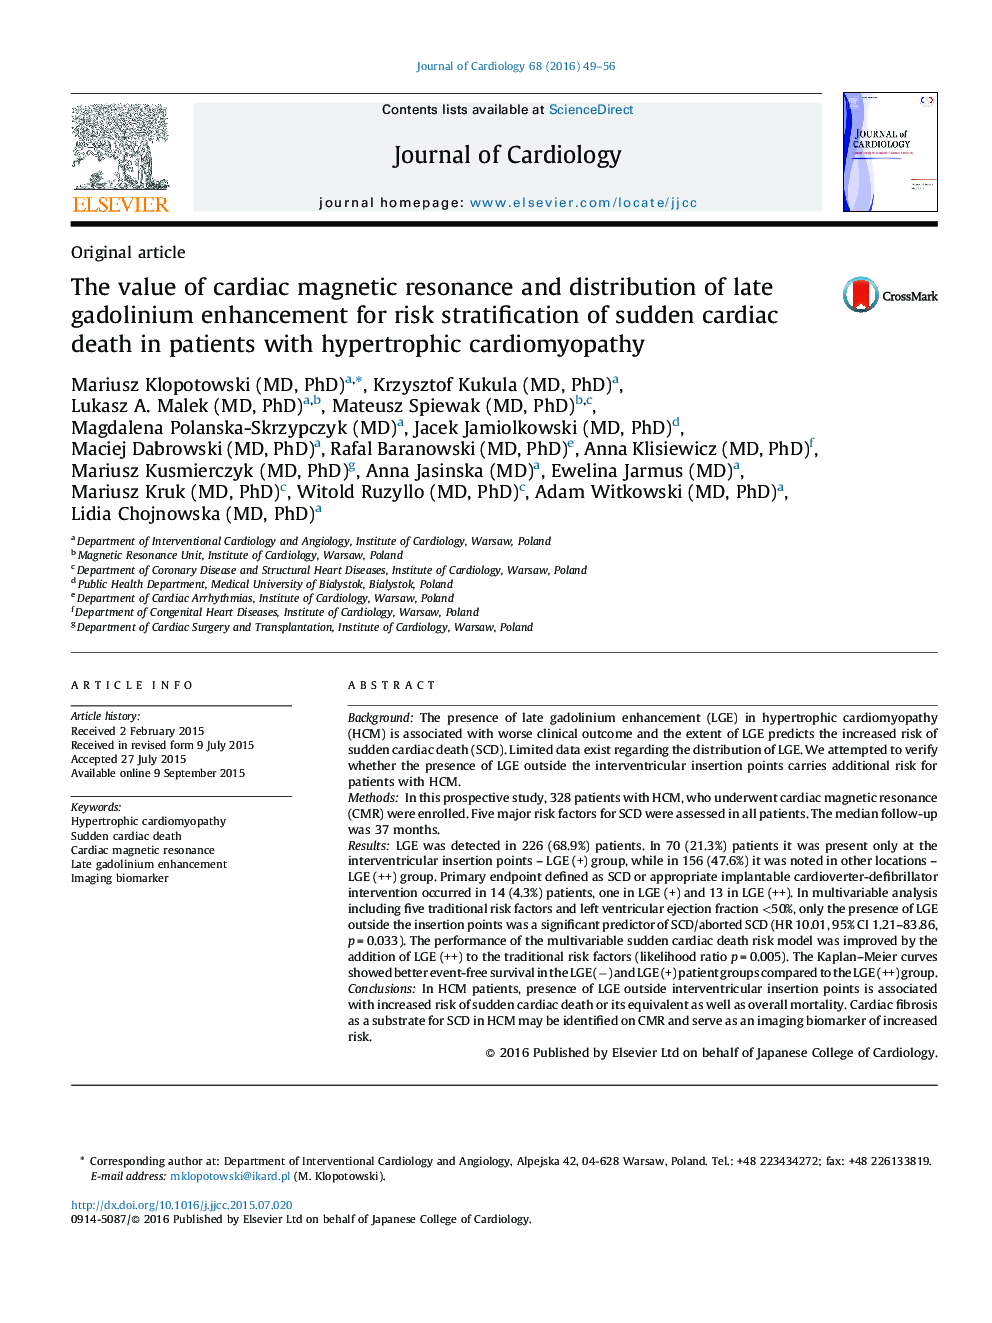 The value of cardiac magnetic resonance and distribution of late gadolinium enhancement for risk stratification of sudden cardiac death in patients with hypertrophic cardiomyopathy